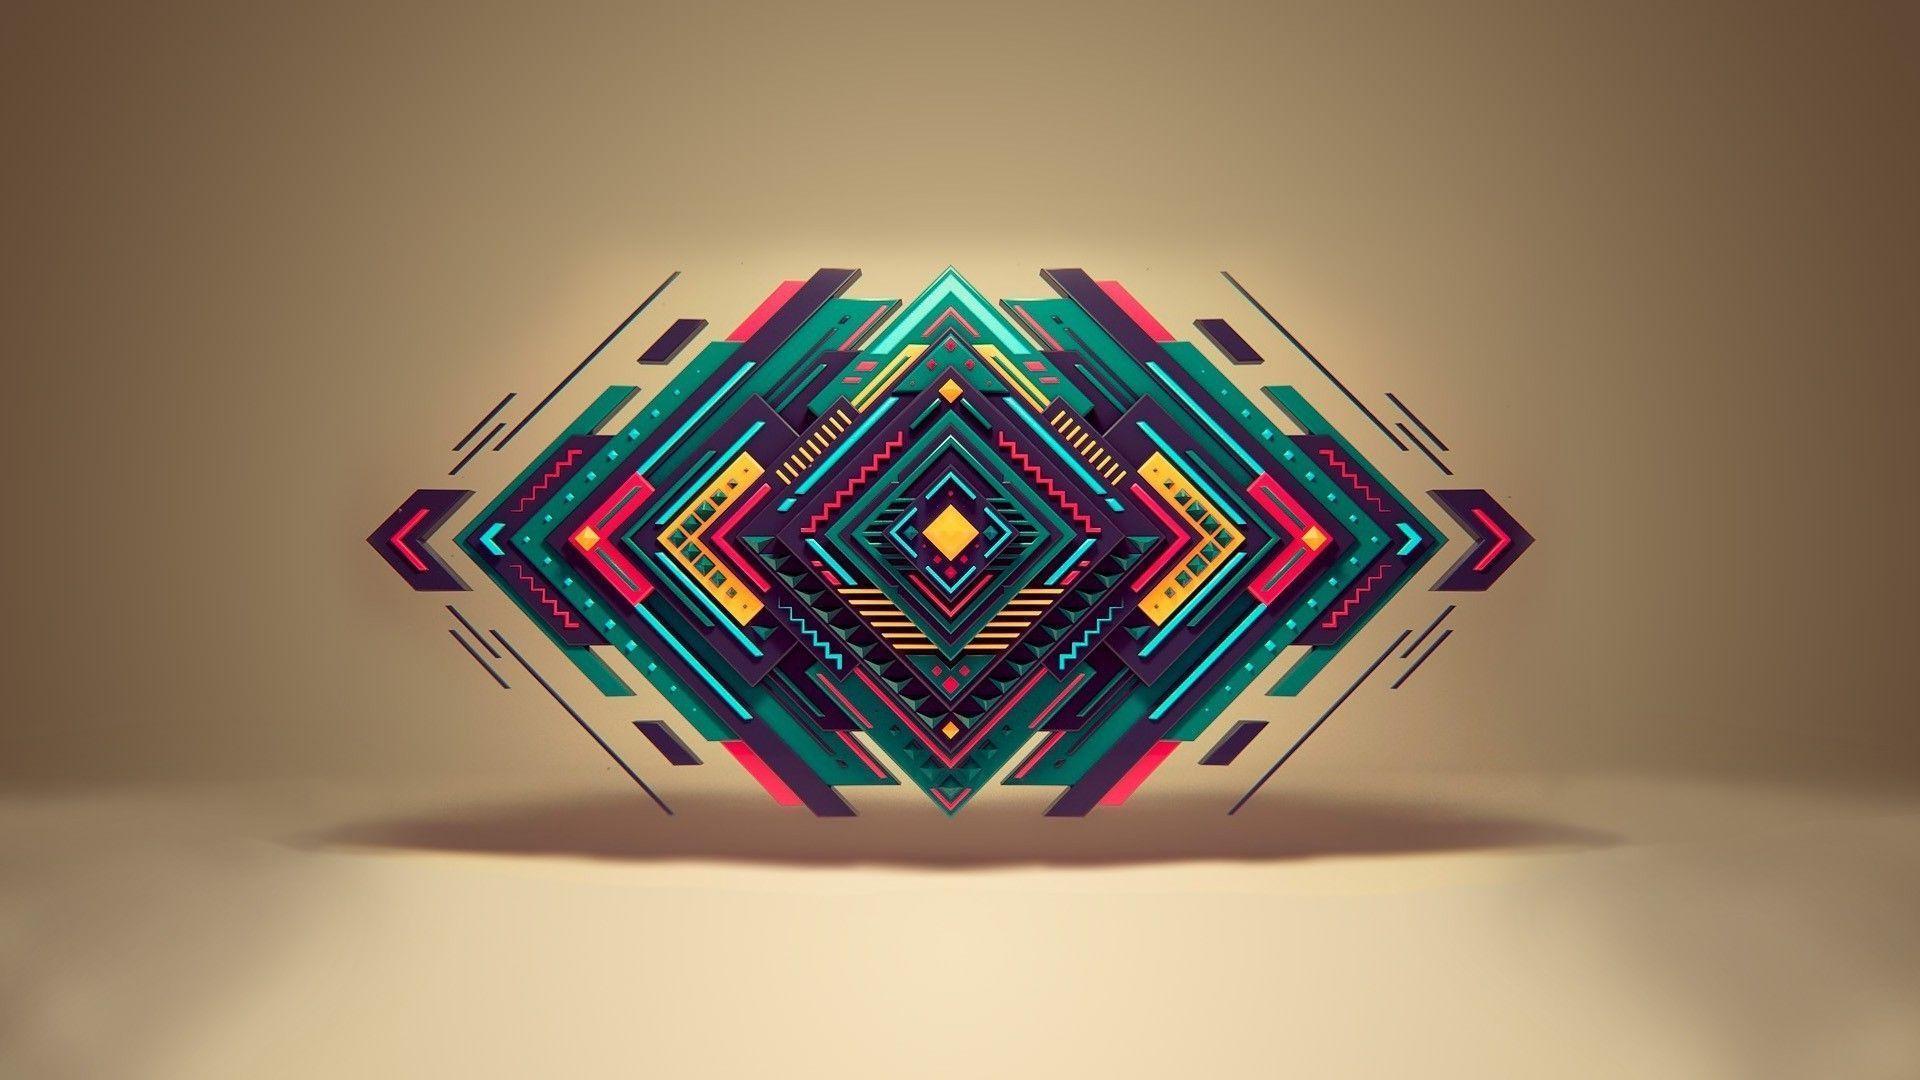 Triangles Wallpaper, HD Image Triangles Collection, FN.NG